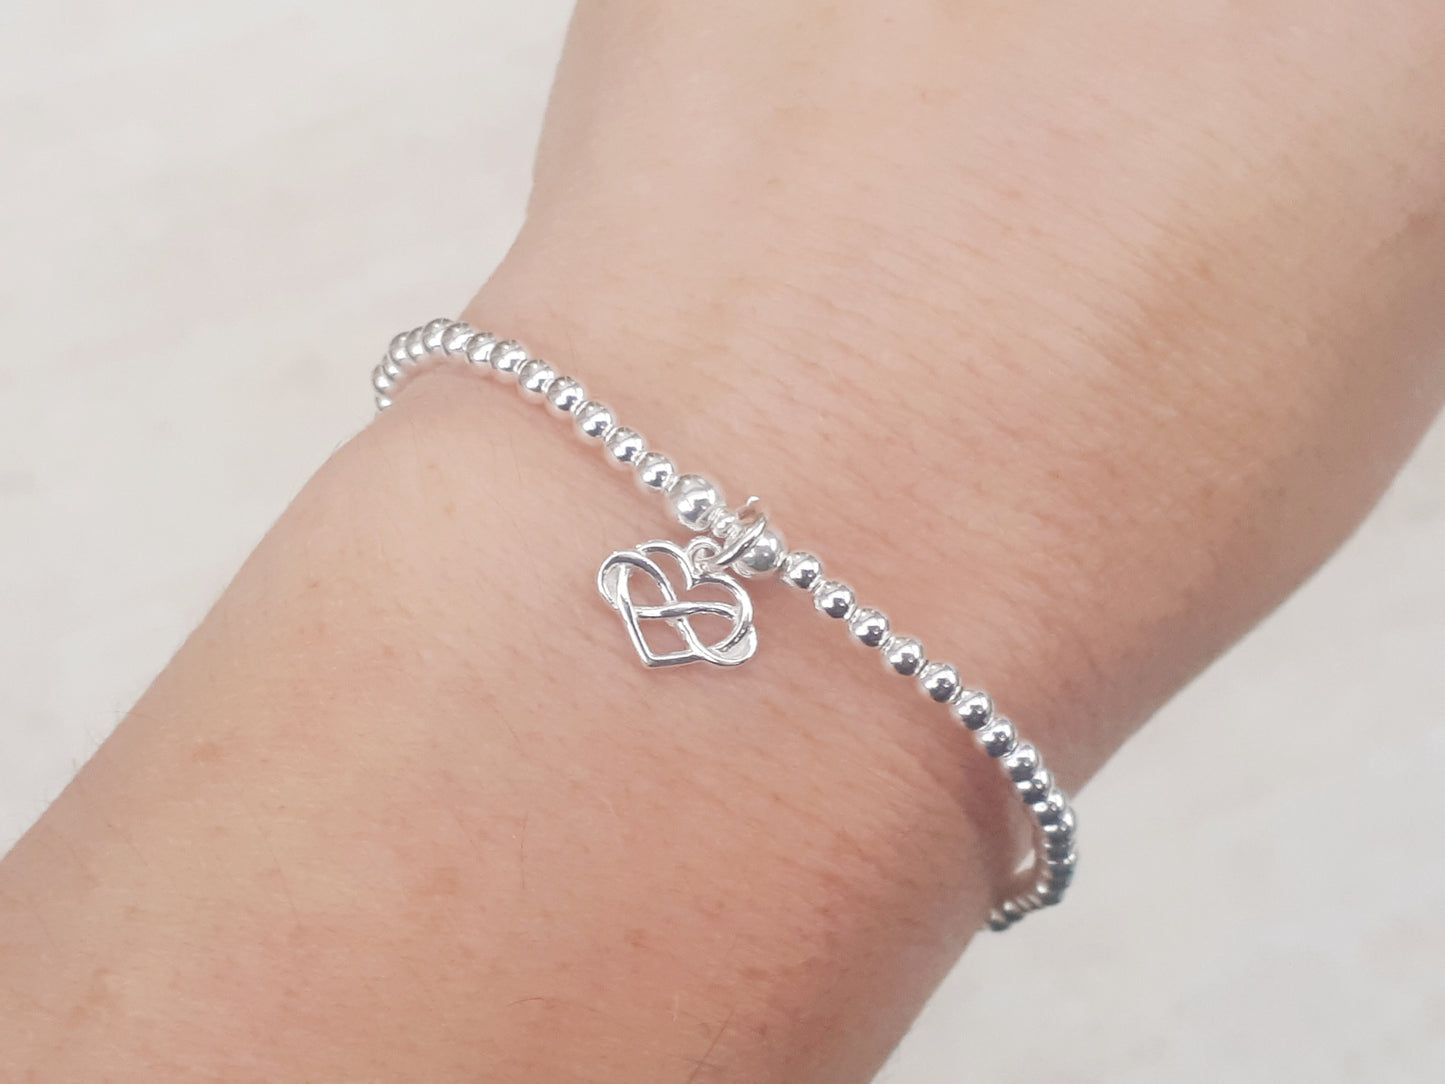 Infinity bracelet in silver. Valentines day gift.